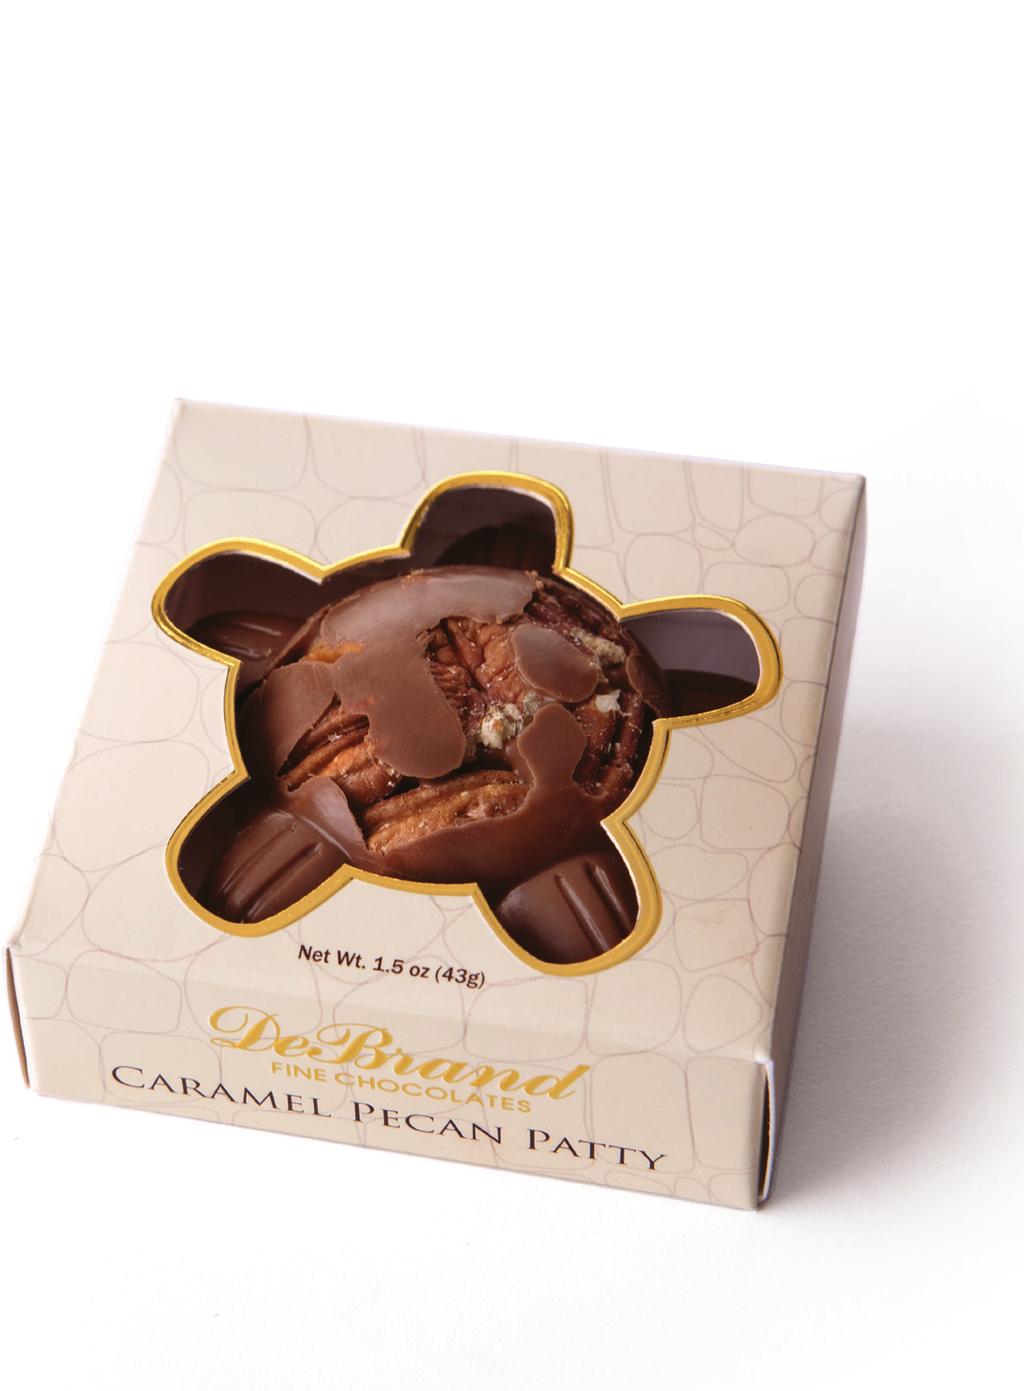 boxes allows the chocolates to remain visible to customers. Available in 2 sizes Box sizes approx.